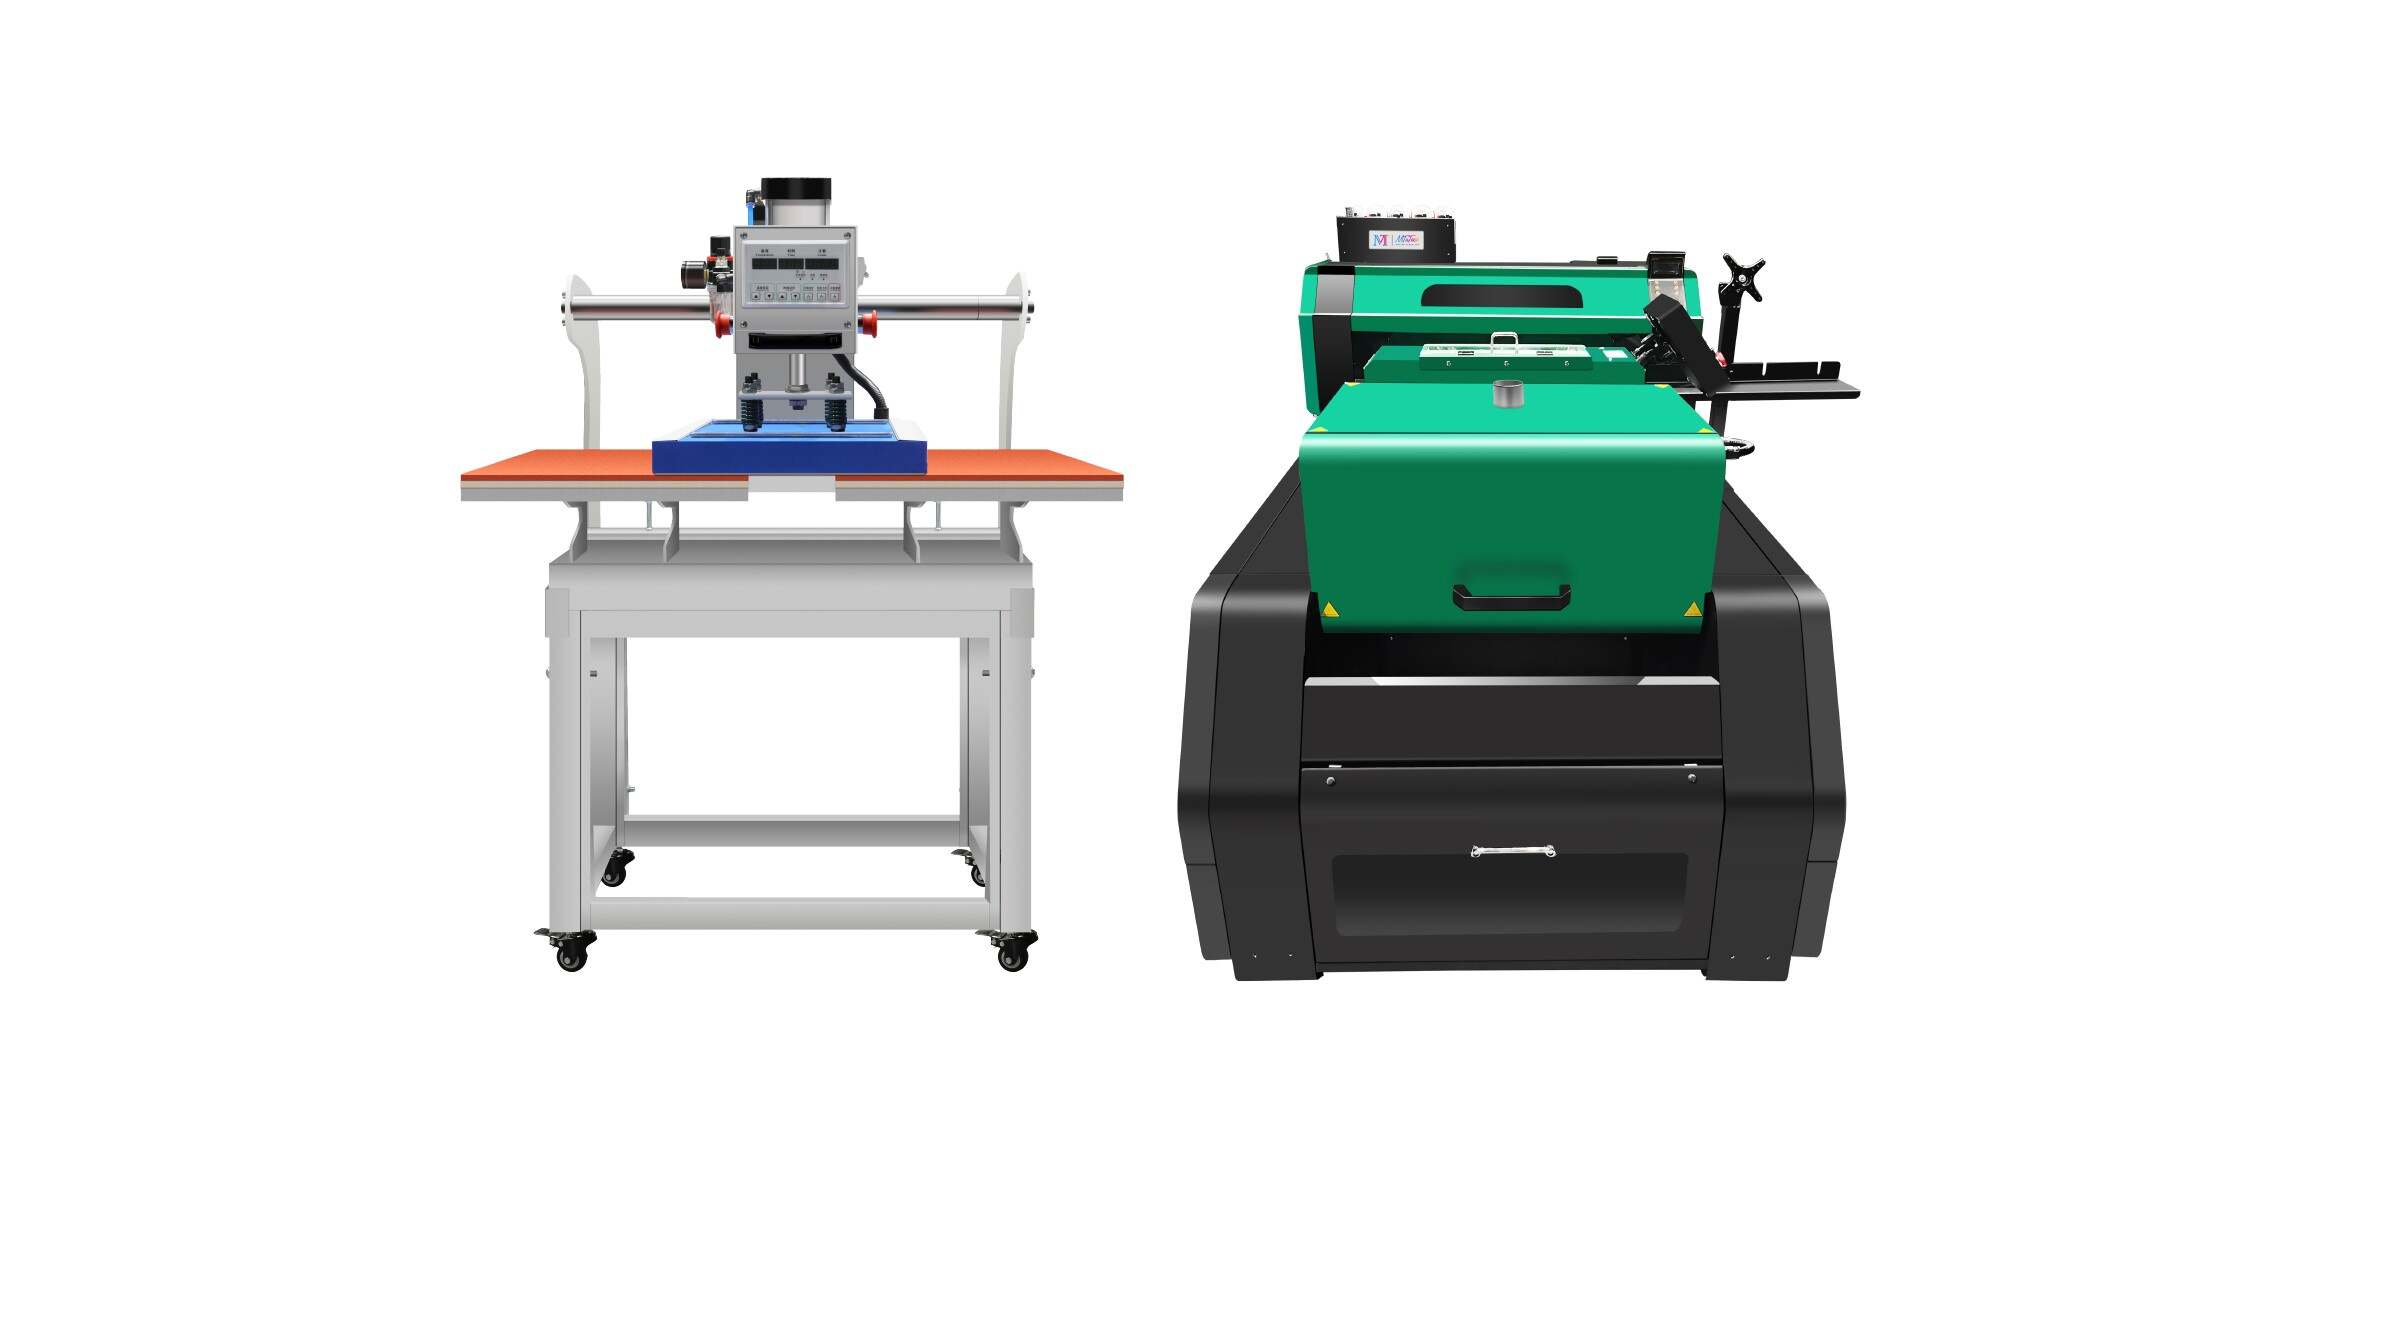 Apache 4-Head Sublimation Printer for Direct to Fabric Sublimation Machine  - China Inkjet Printer, Sublimation Printer